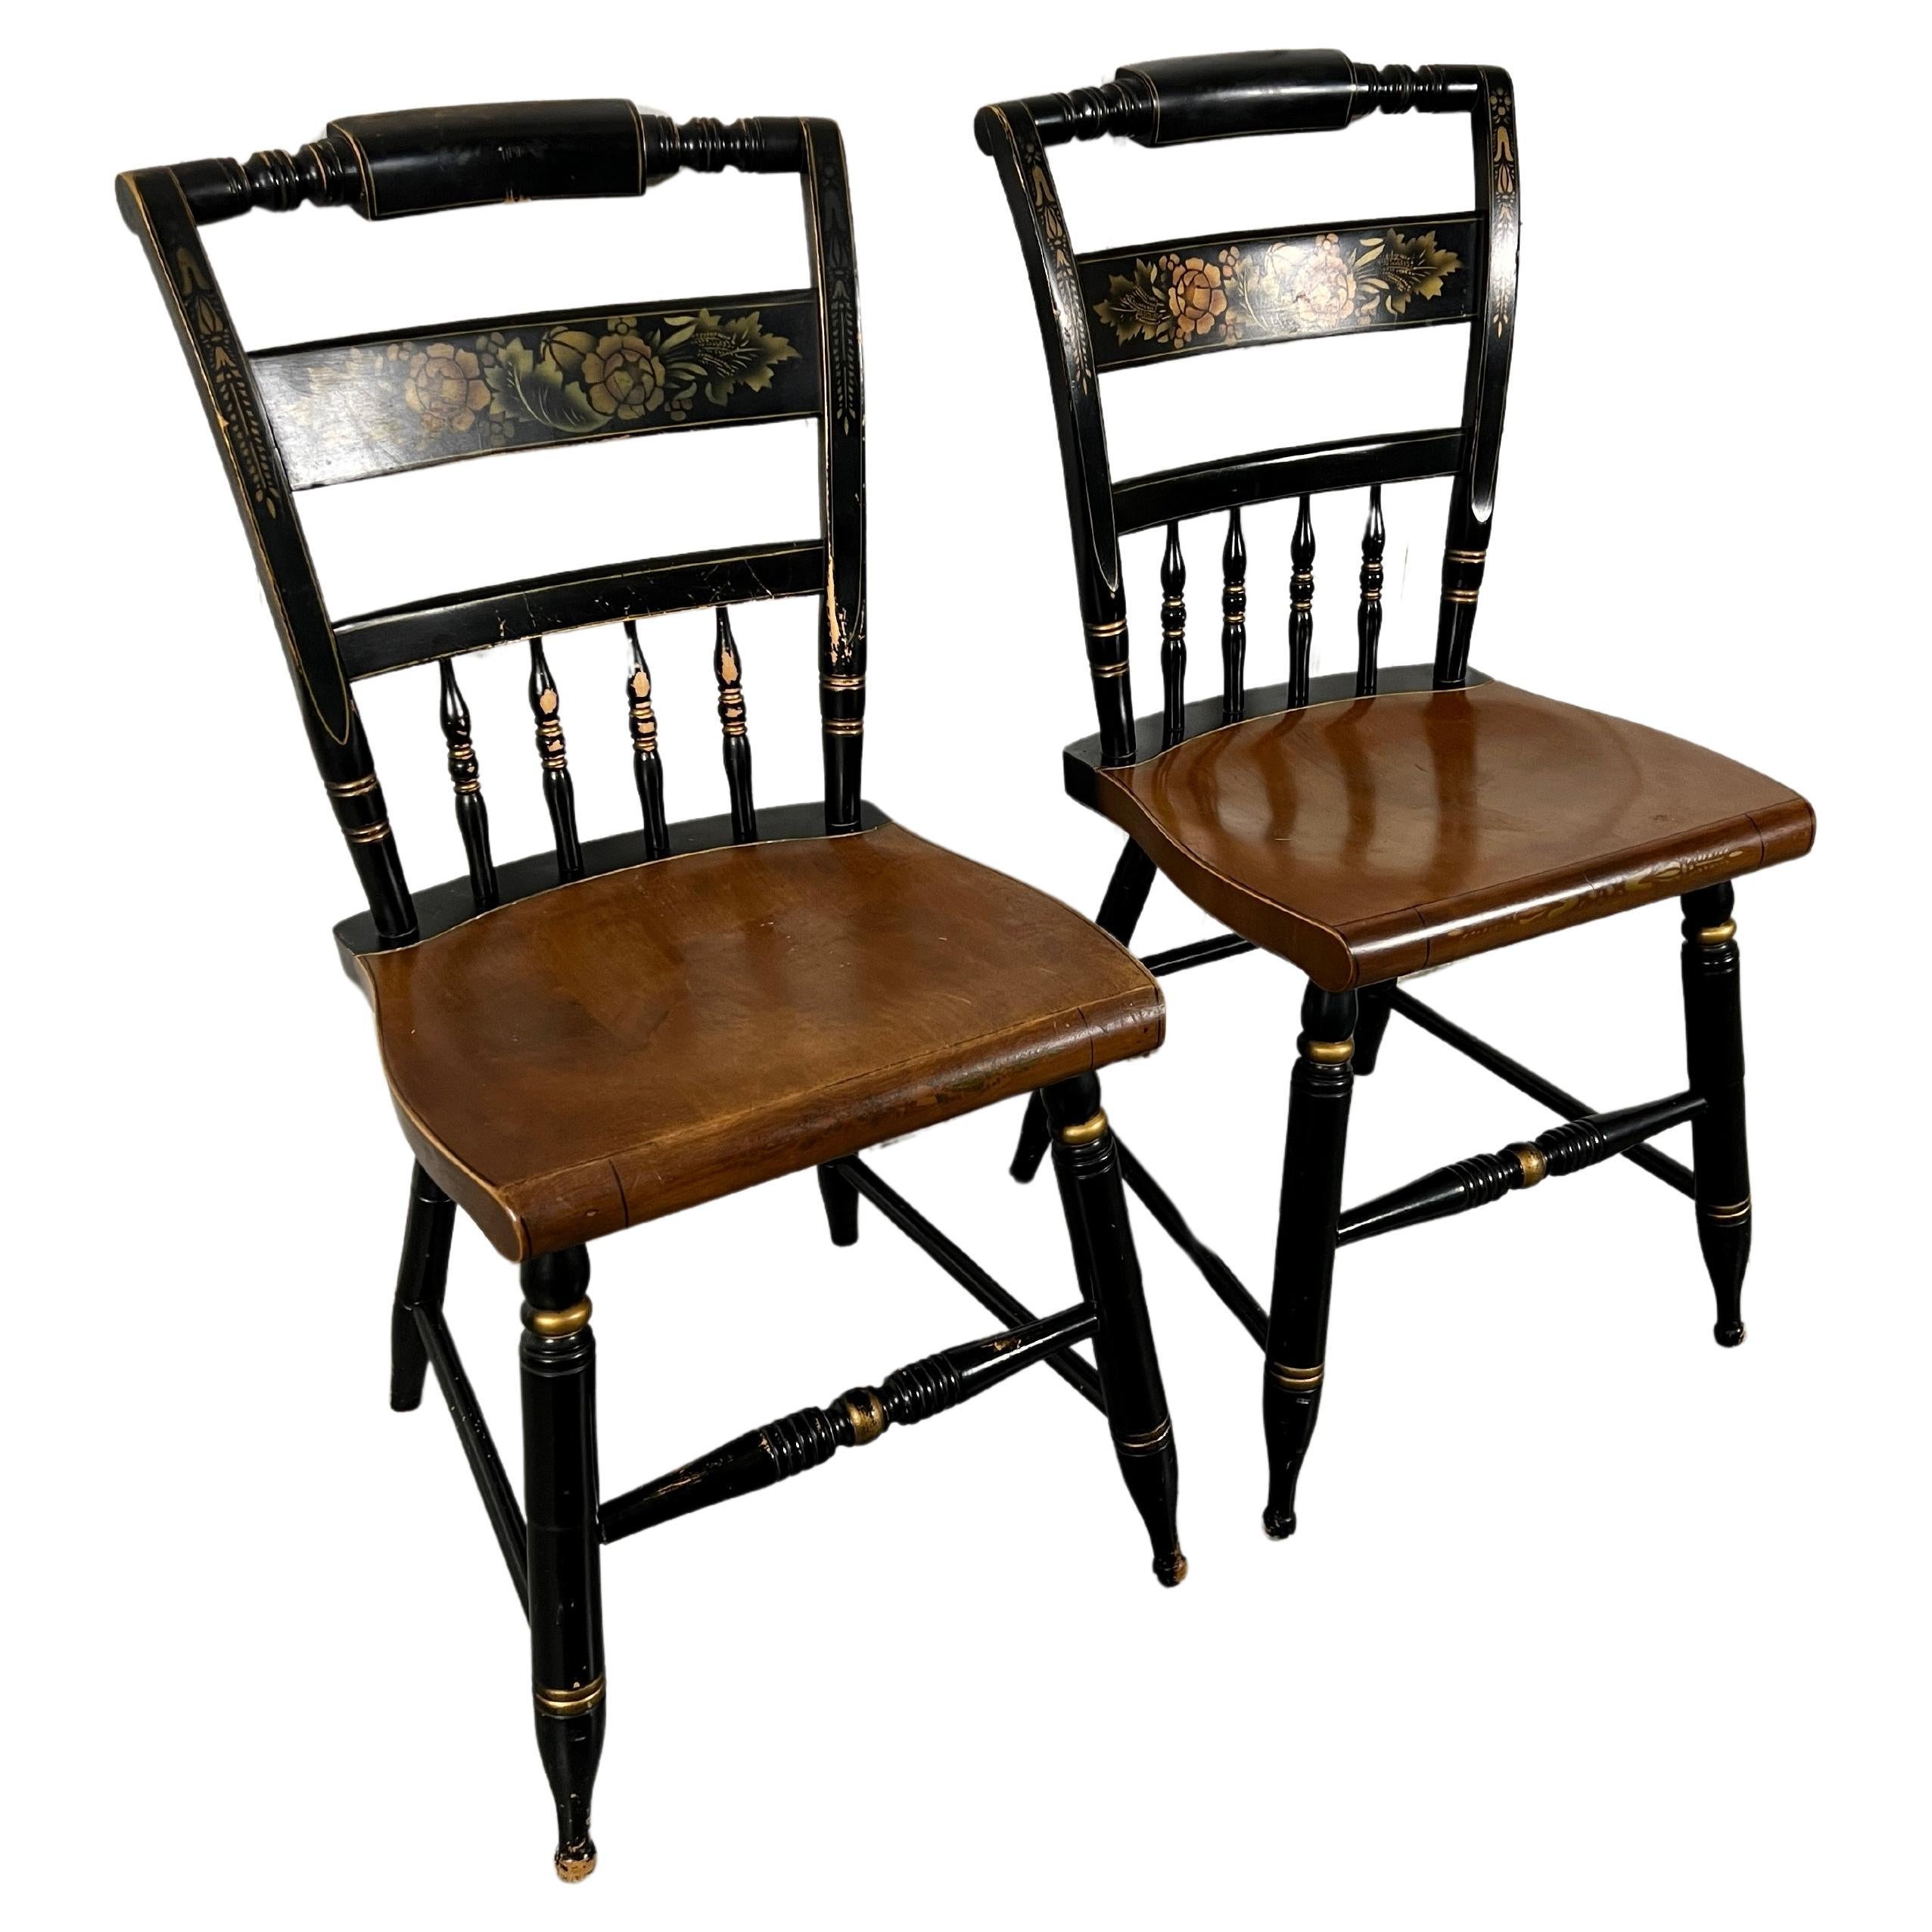 Late 20th century Hitchcock style chairs. These are ebonized then hand stenciled with a Neo Classicial design. Very sturdy.